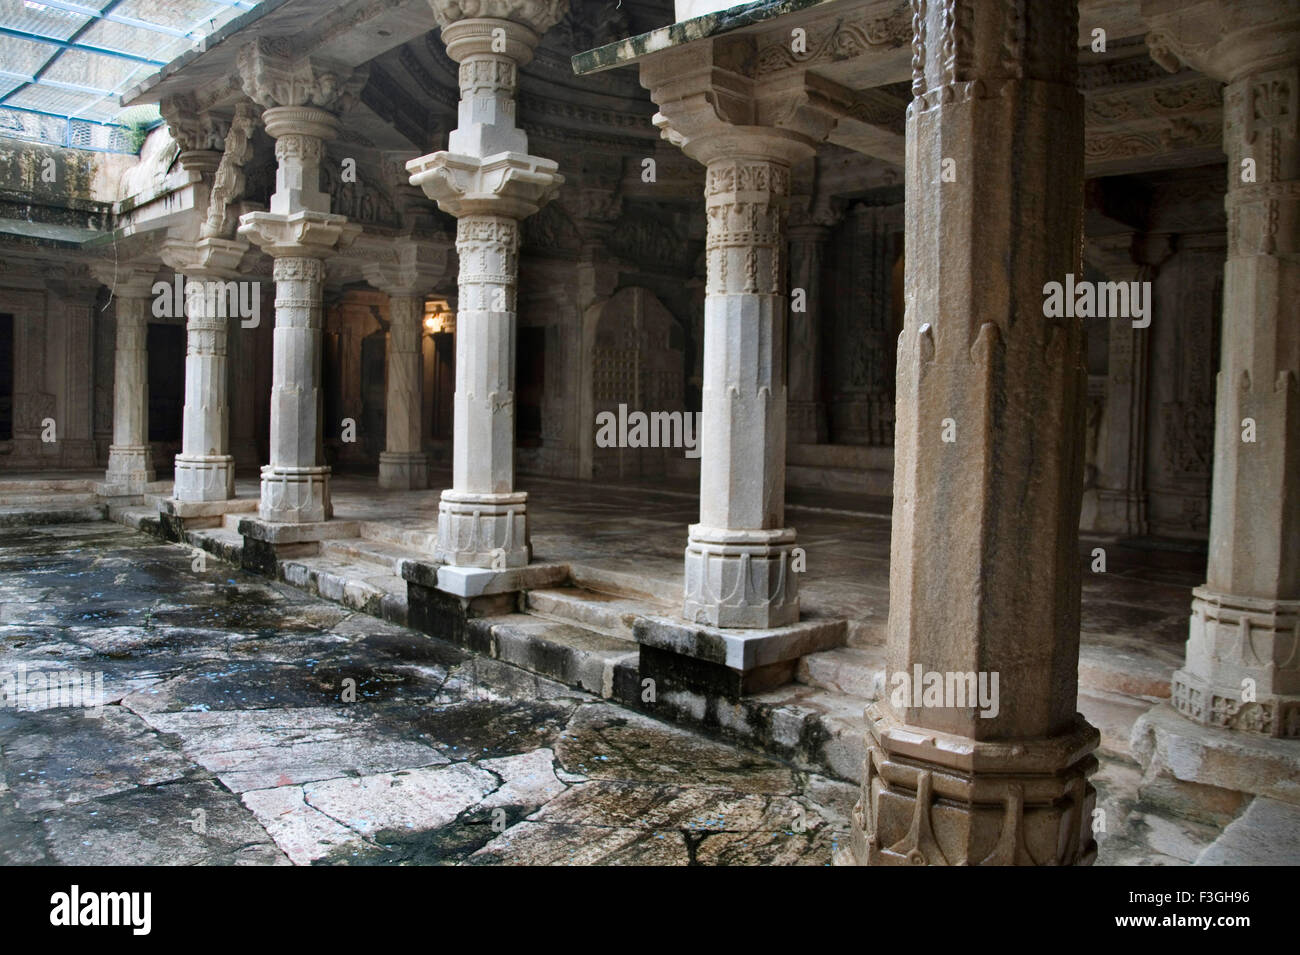 Pillars and gallery around 2000 years old ancient monument in Adinath Jain temple Heritage ; Village Dilwara ; Udaipur Stock Photo